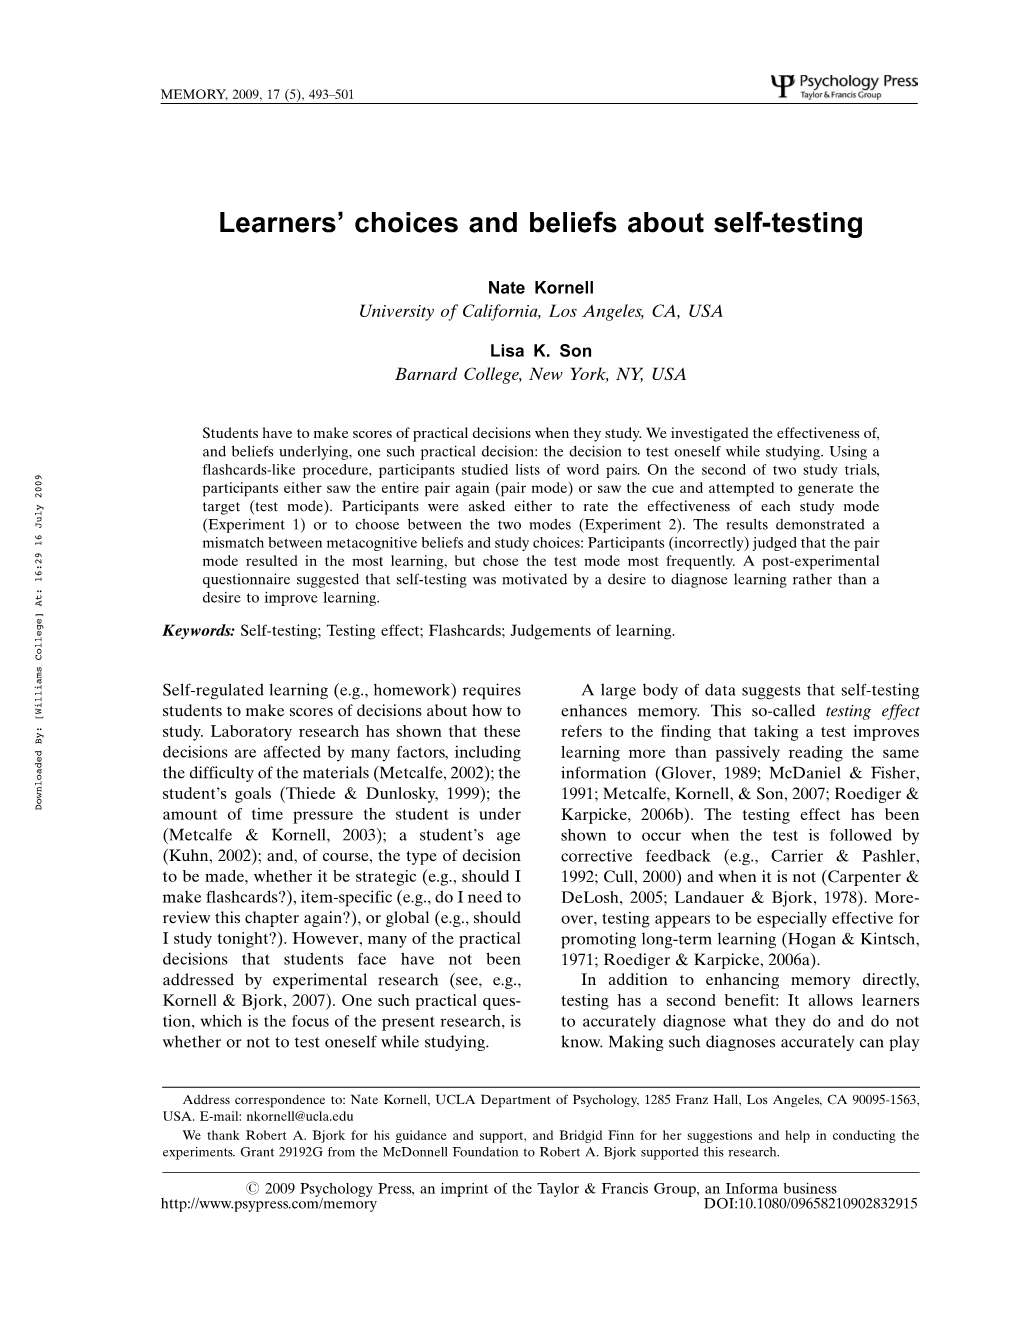 Learners' Choices and Beliefs About Self-Testing